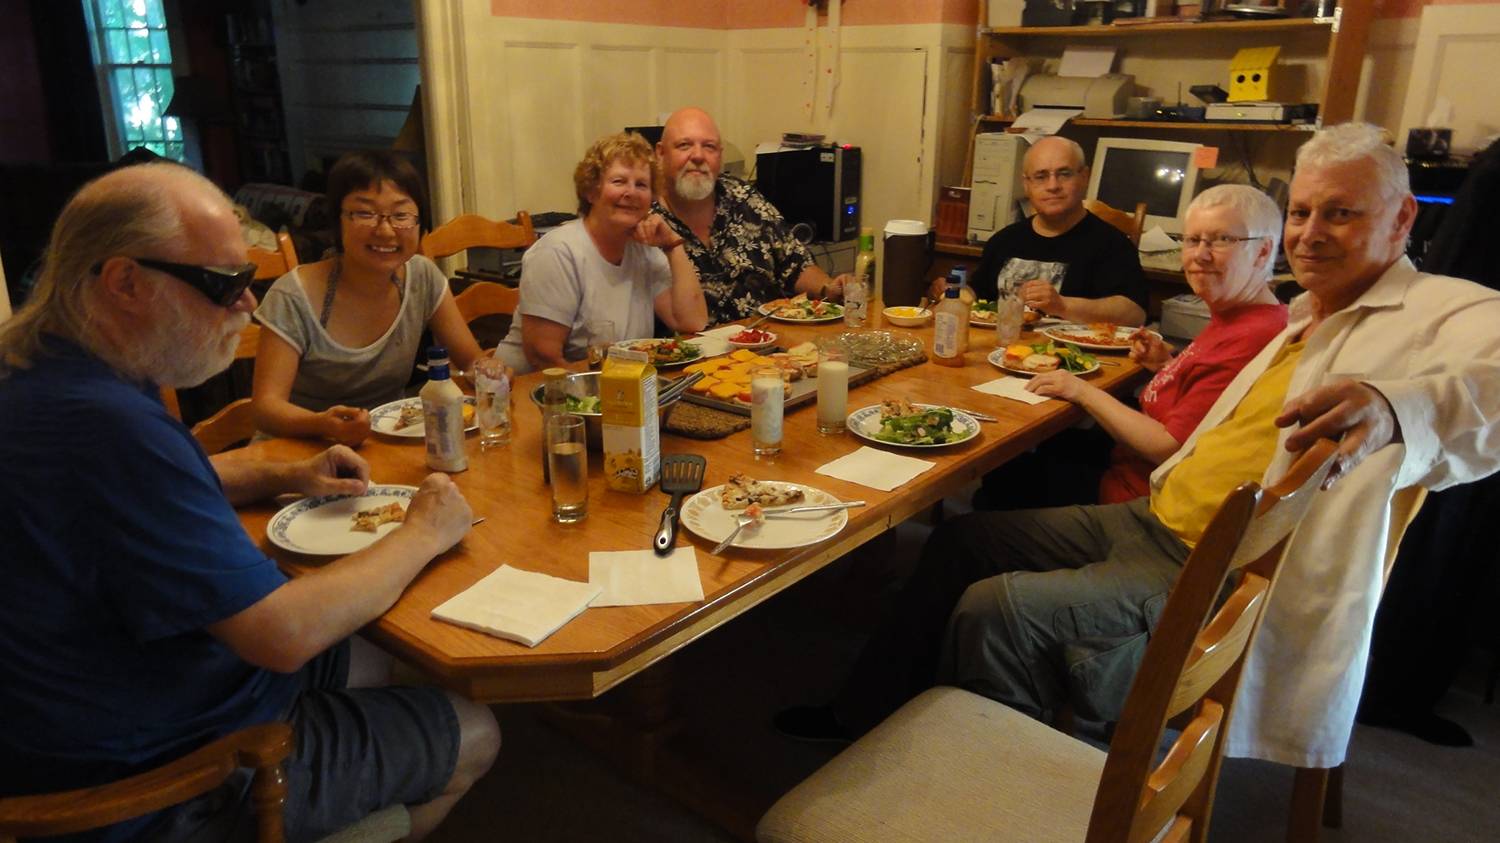 Picture:  The gang at home in the Bhigg Houise, Winnipeg. Left to right - Dave Clement, Panda, Donna and Terry, Doug, Elizabeth, David.